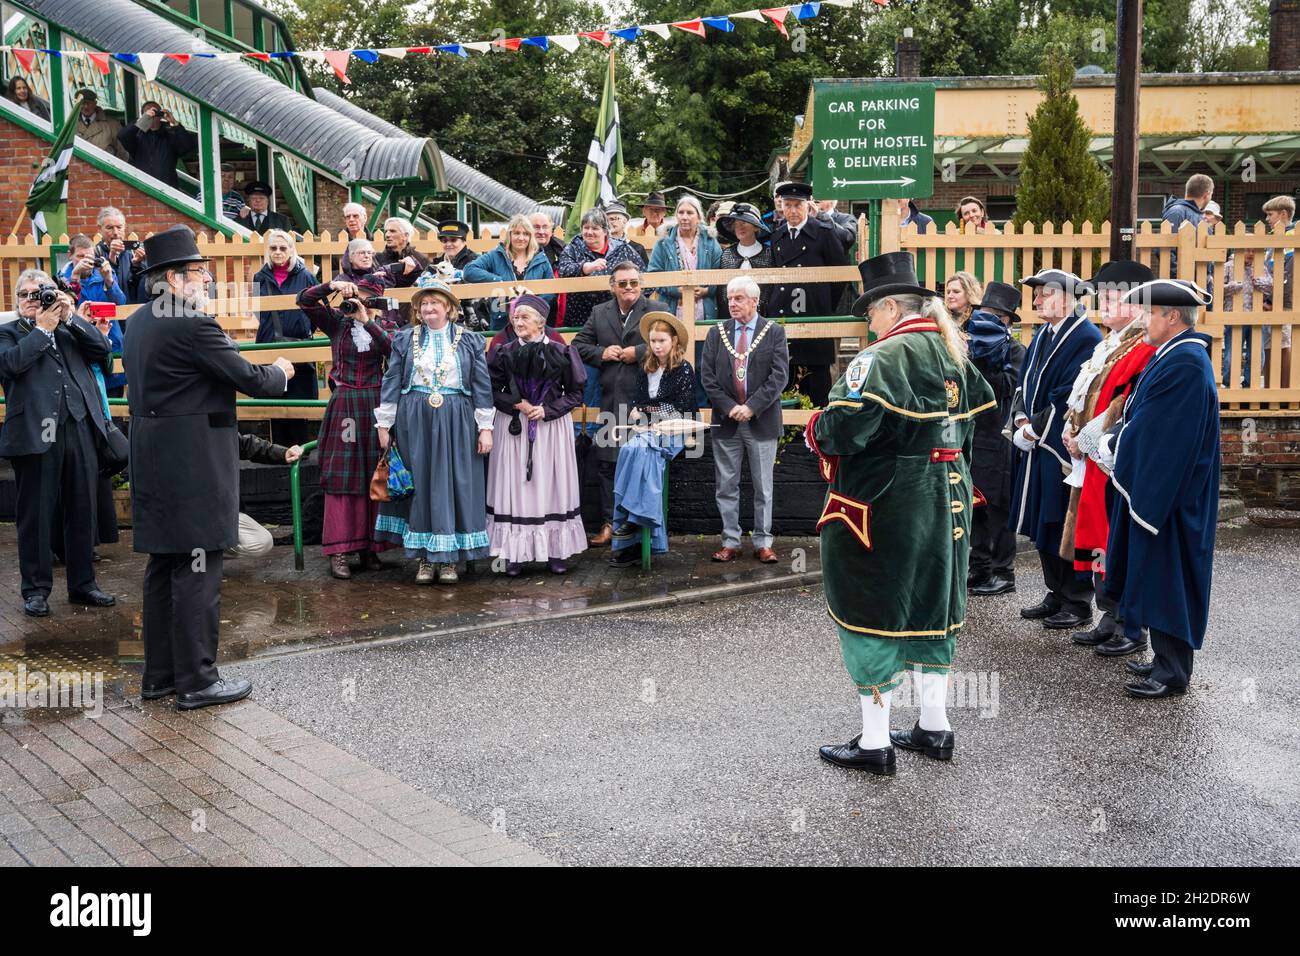 Costumed celebration marking 150 years of rail in Okehampton, Devon, with the town mayor and dignitaries recreating the day the railway first came. Stock Photo